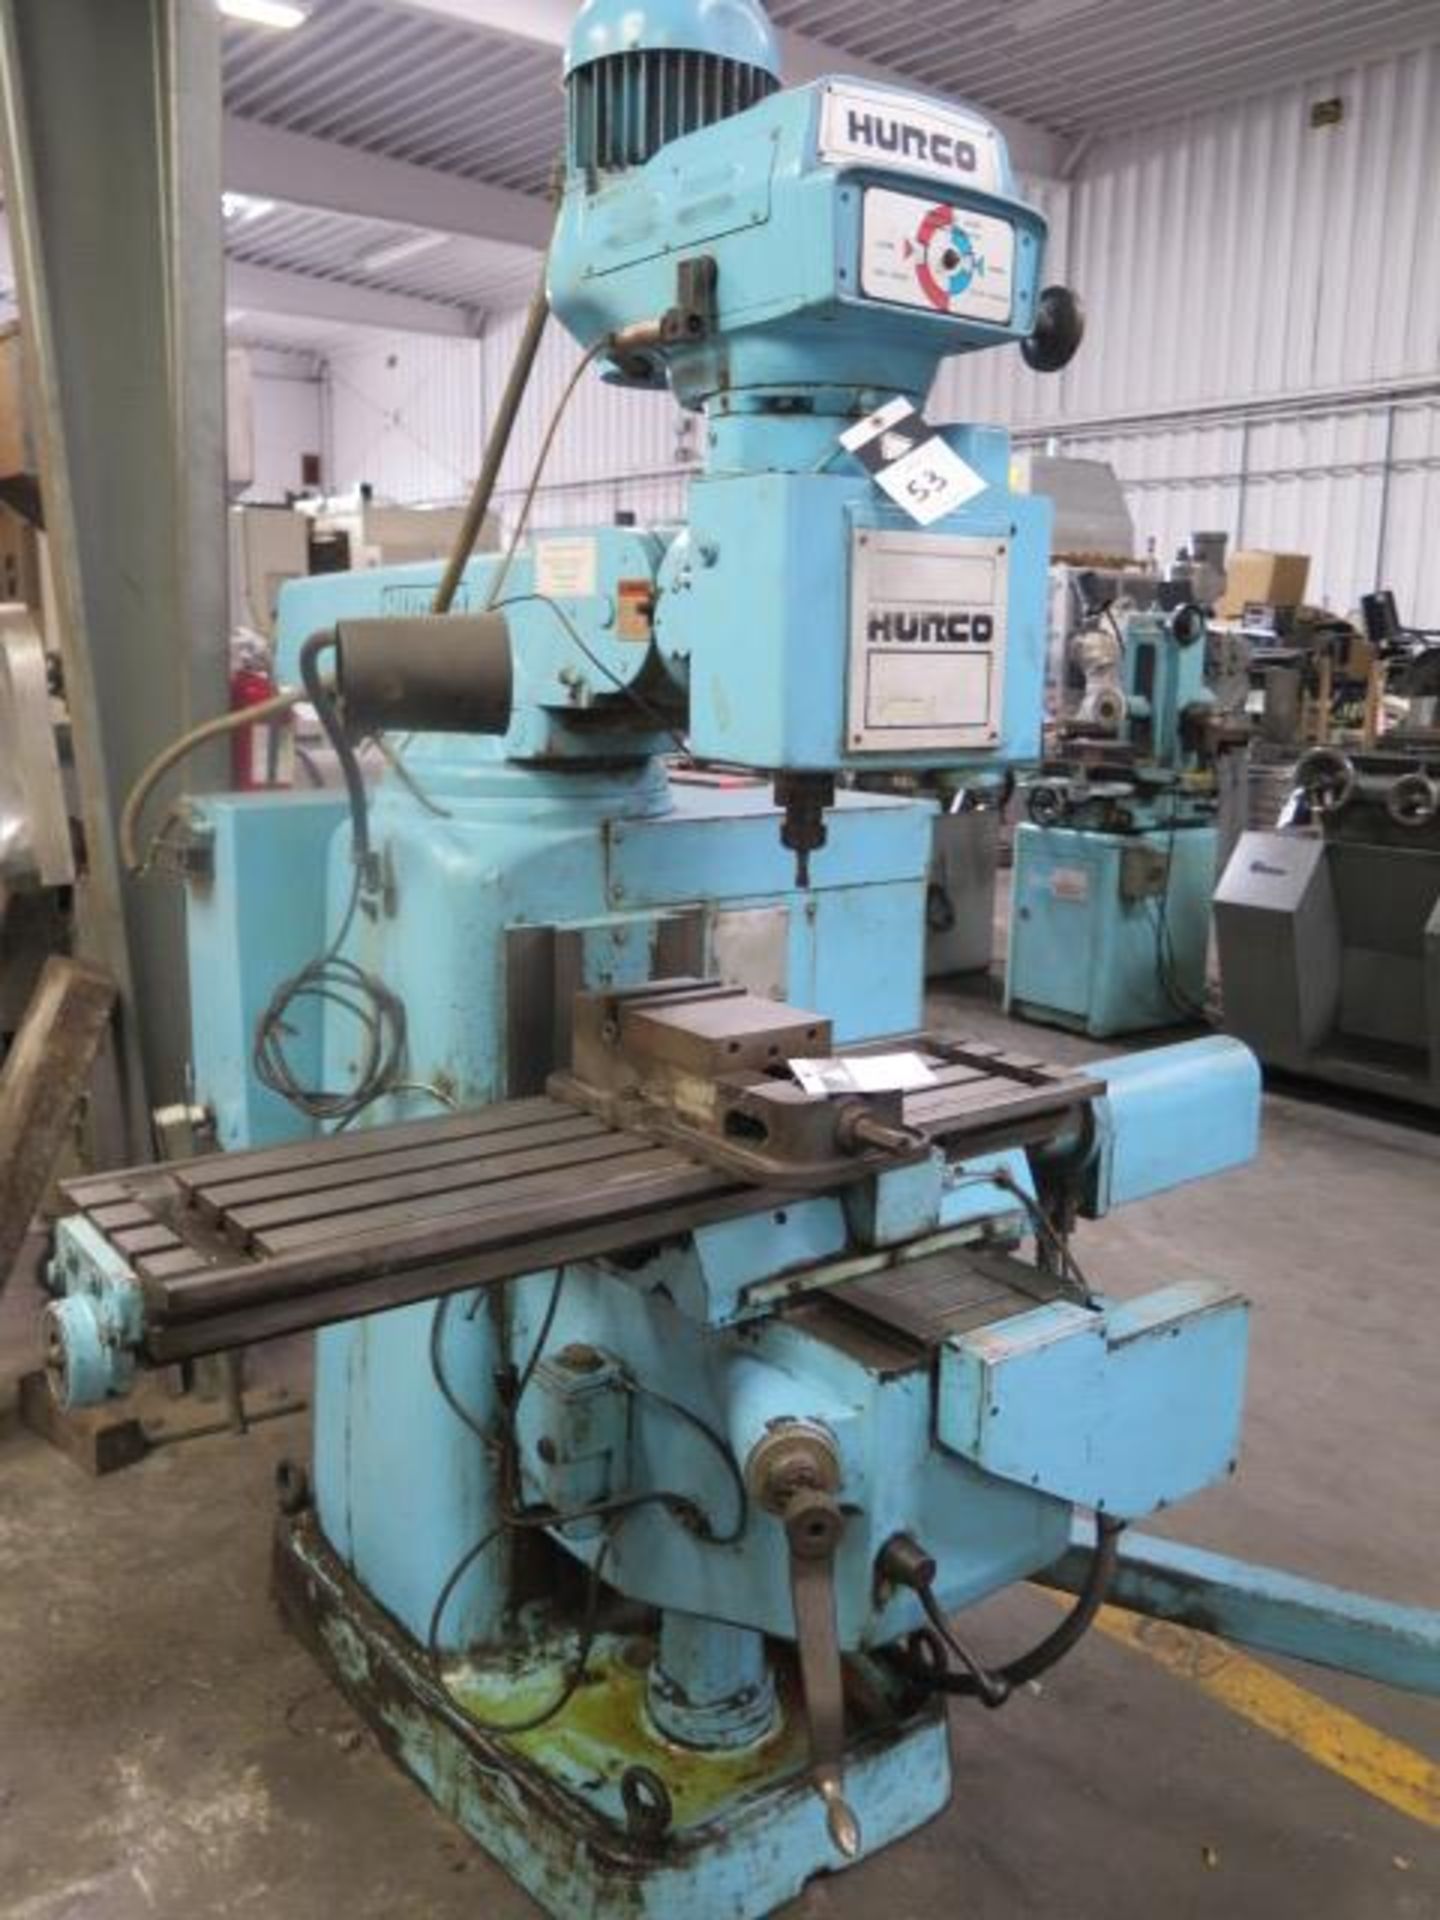 Hurco 3-Axis CNC Vertical Mill s/n SDX-8016074A w/ Centroid Controls, 60-4200 Dial RPM, SOLD AS IS - Image 2 of 12